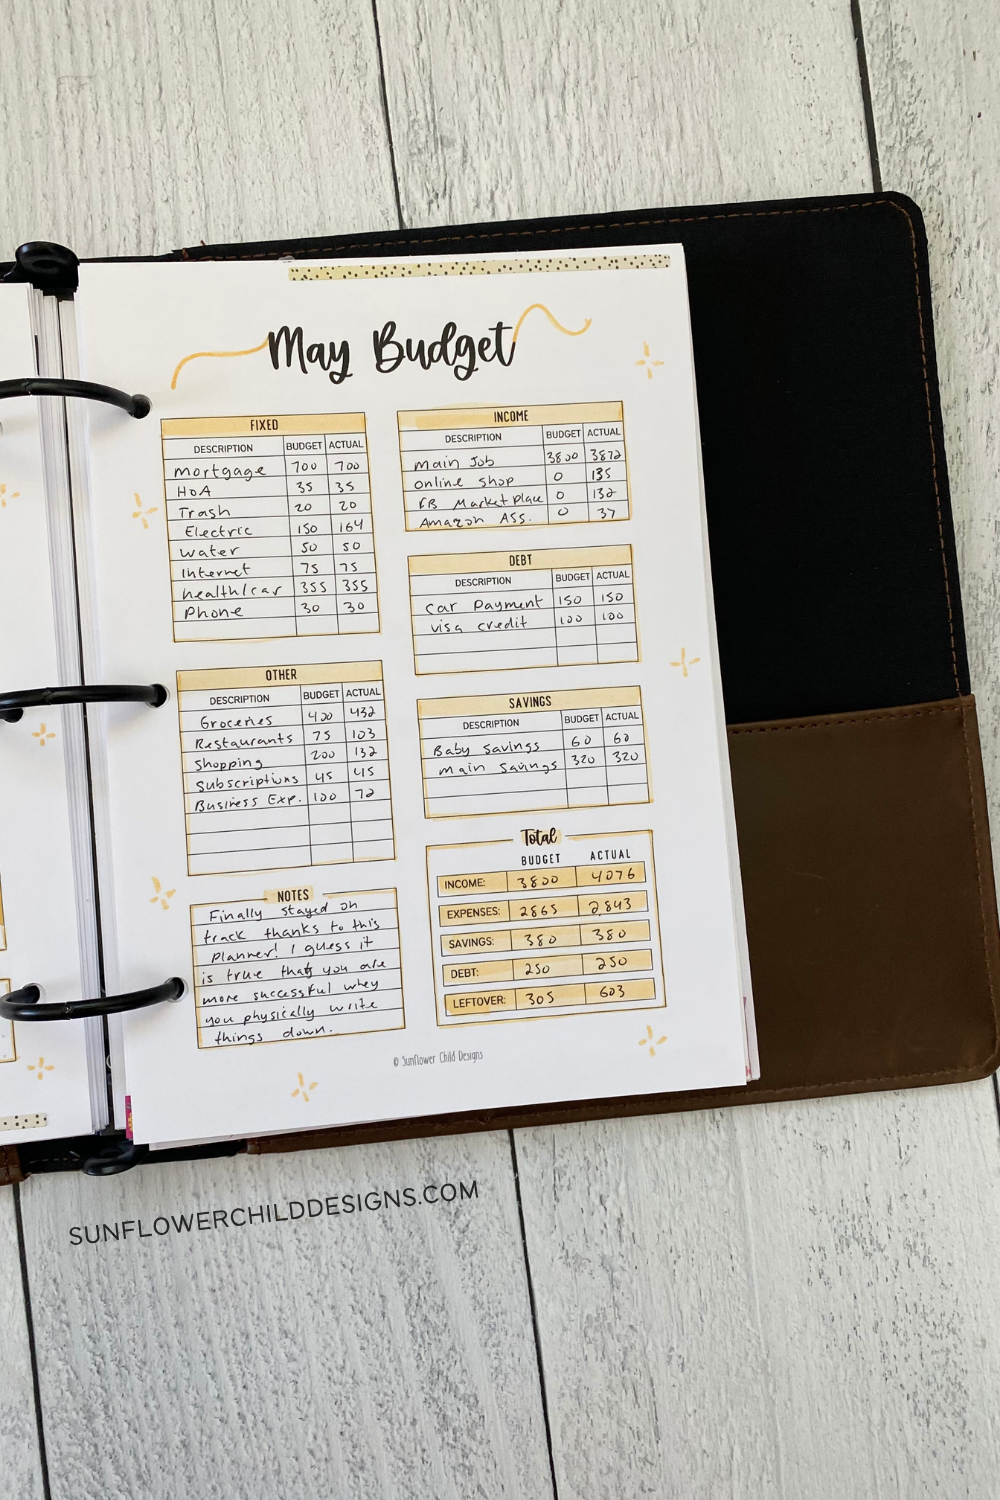 Monthly Budget Page in the Finance Planner